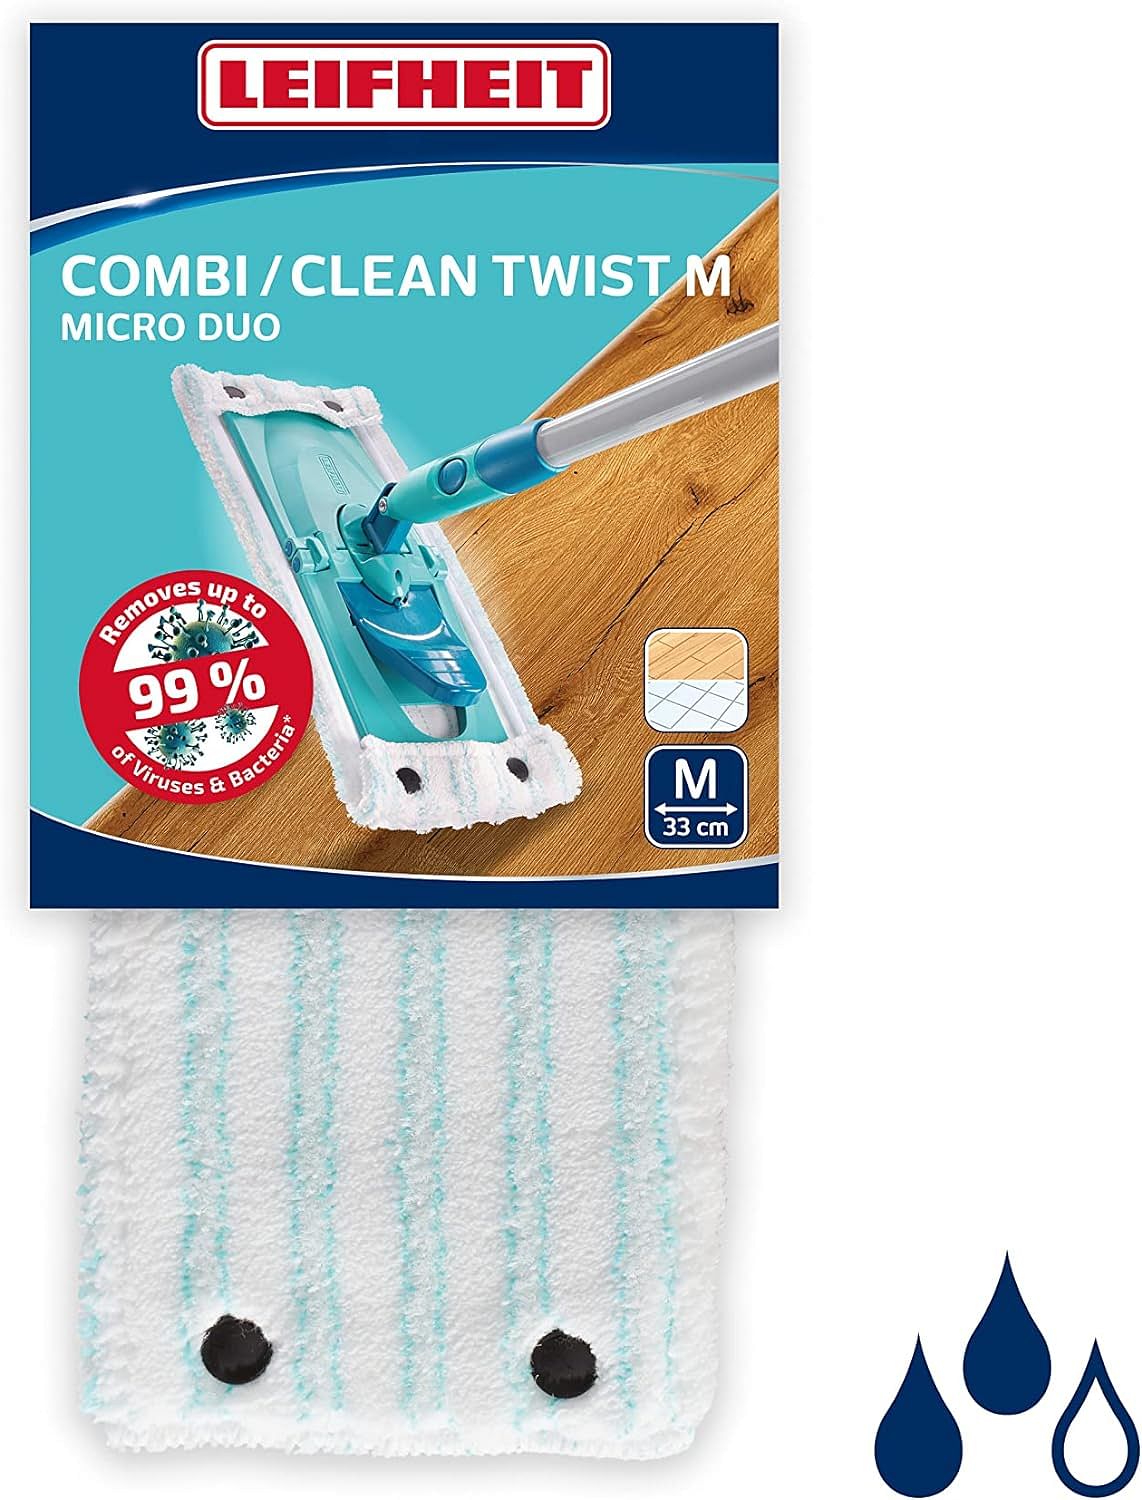 Leifheit mop cover Clean Twist M micro duo made of microfiber, absorbent floor mop replacement cover, 33cm wide replacement cover ideal for smooth floors such as tiles or laminate